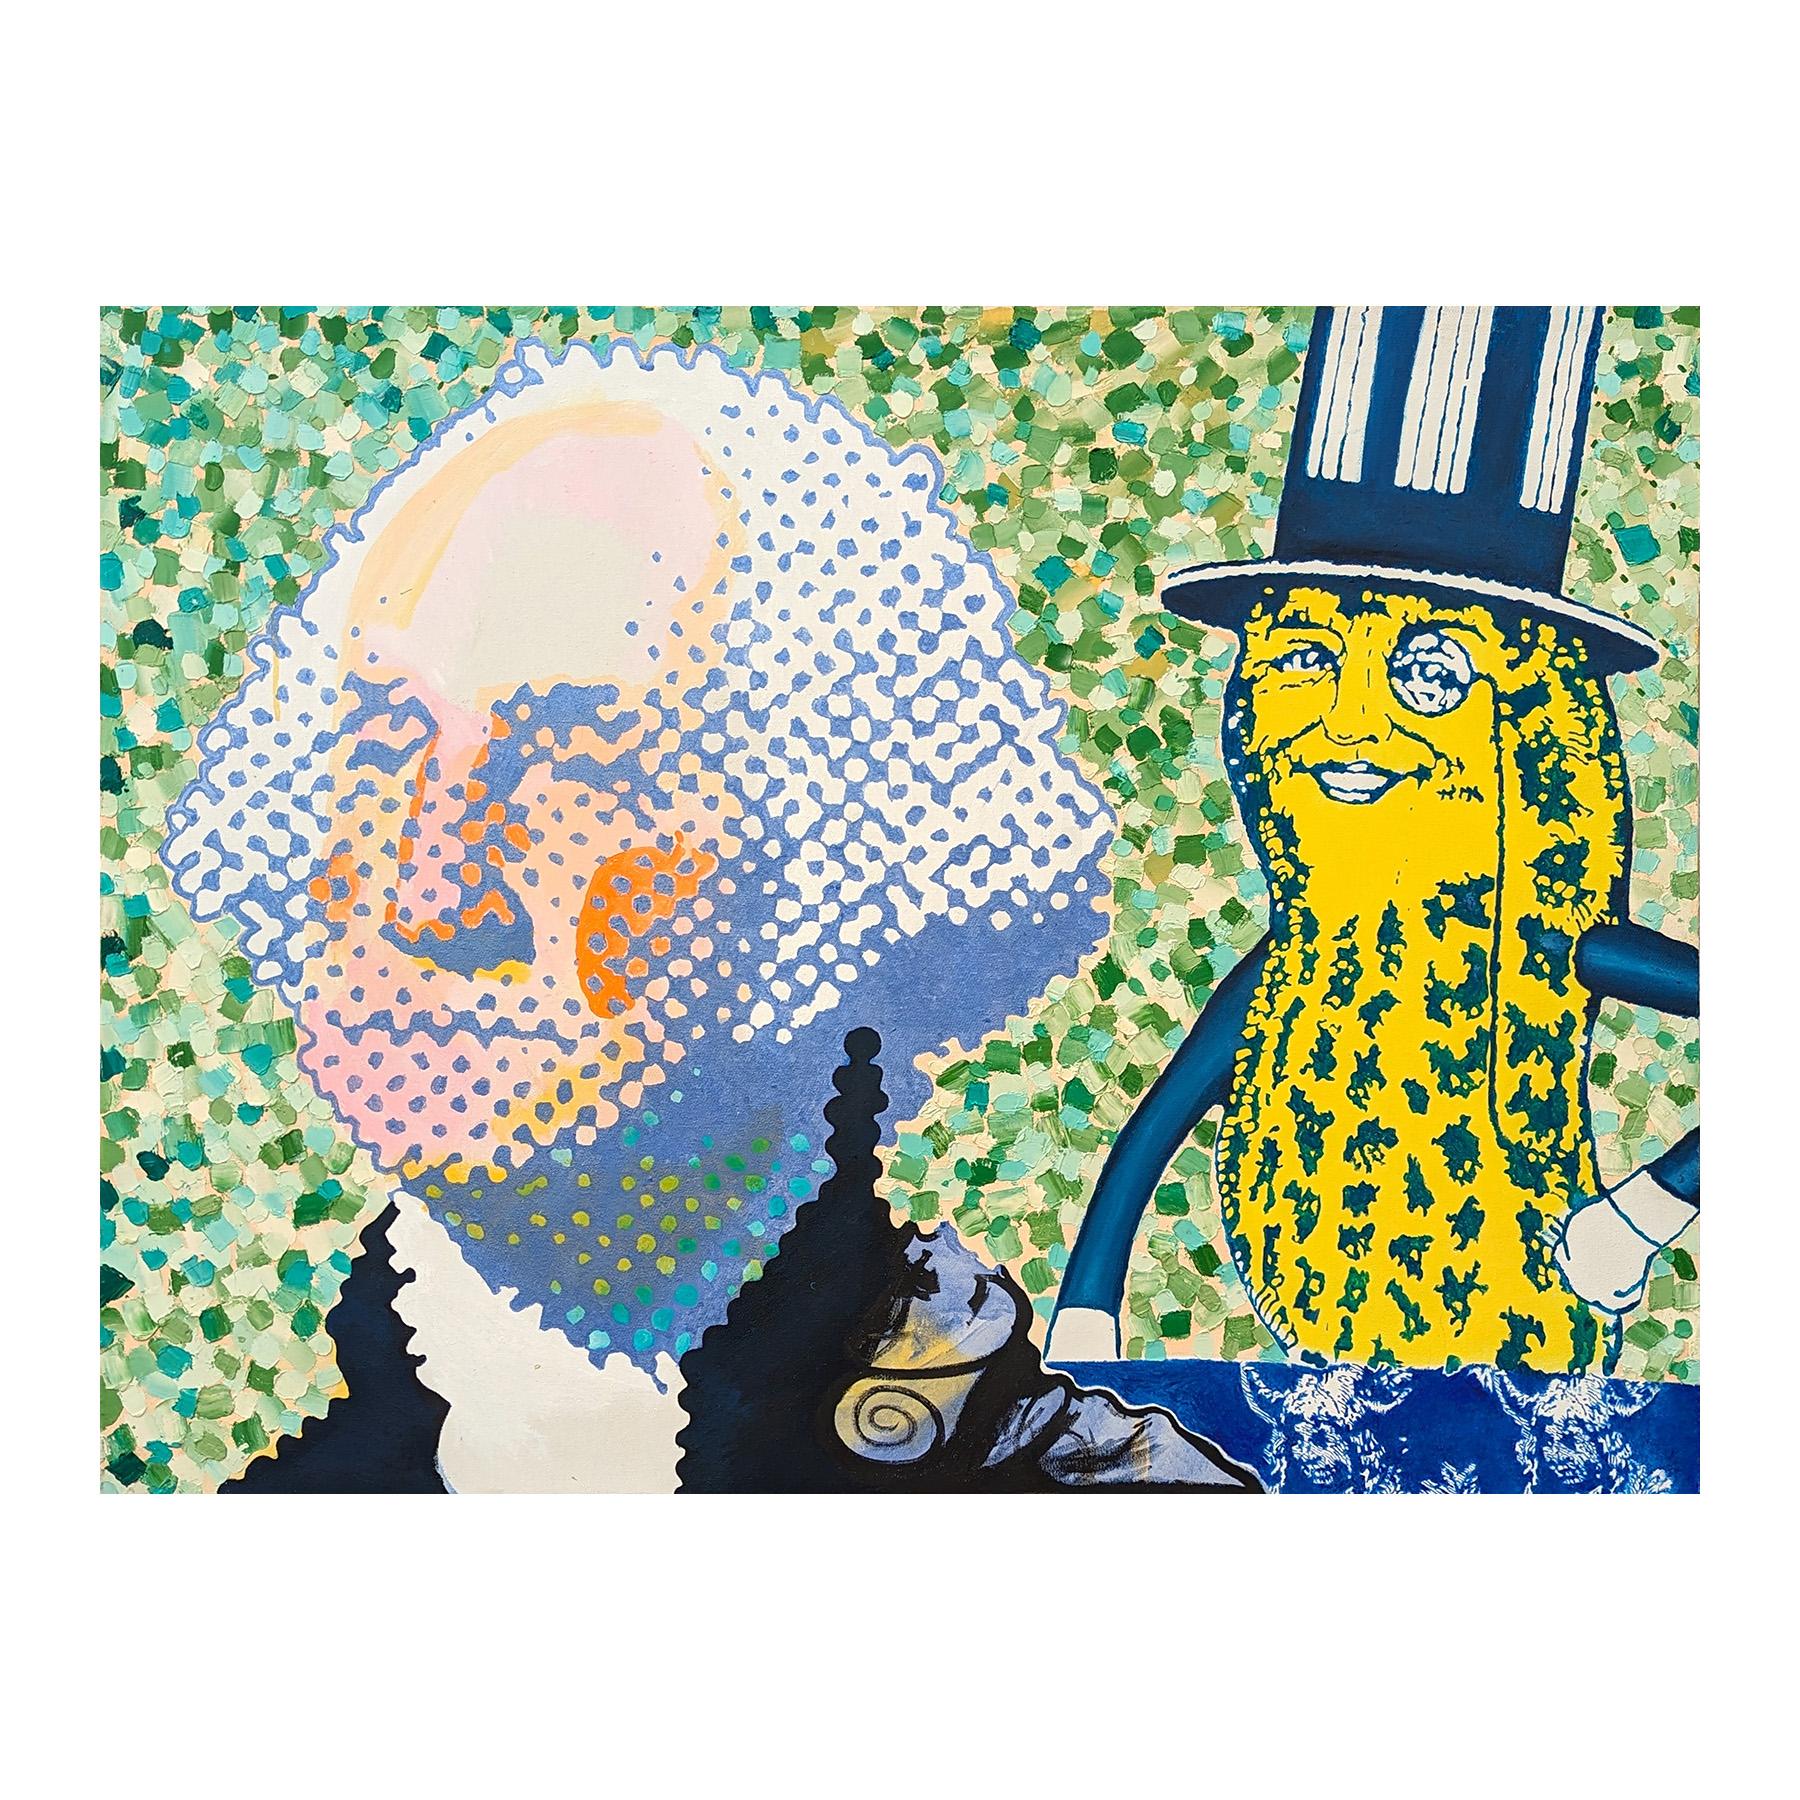 Contemporary pop culture inspired painting by Texas born artist Clark Fox. The work features a screen print inspired portrait of George Washington, Mr. Peanut, and a dual portrait of a Native American set against a blue and green dotted background.